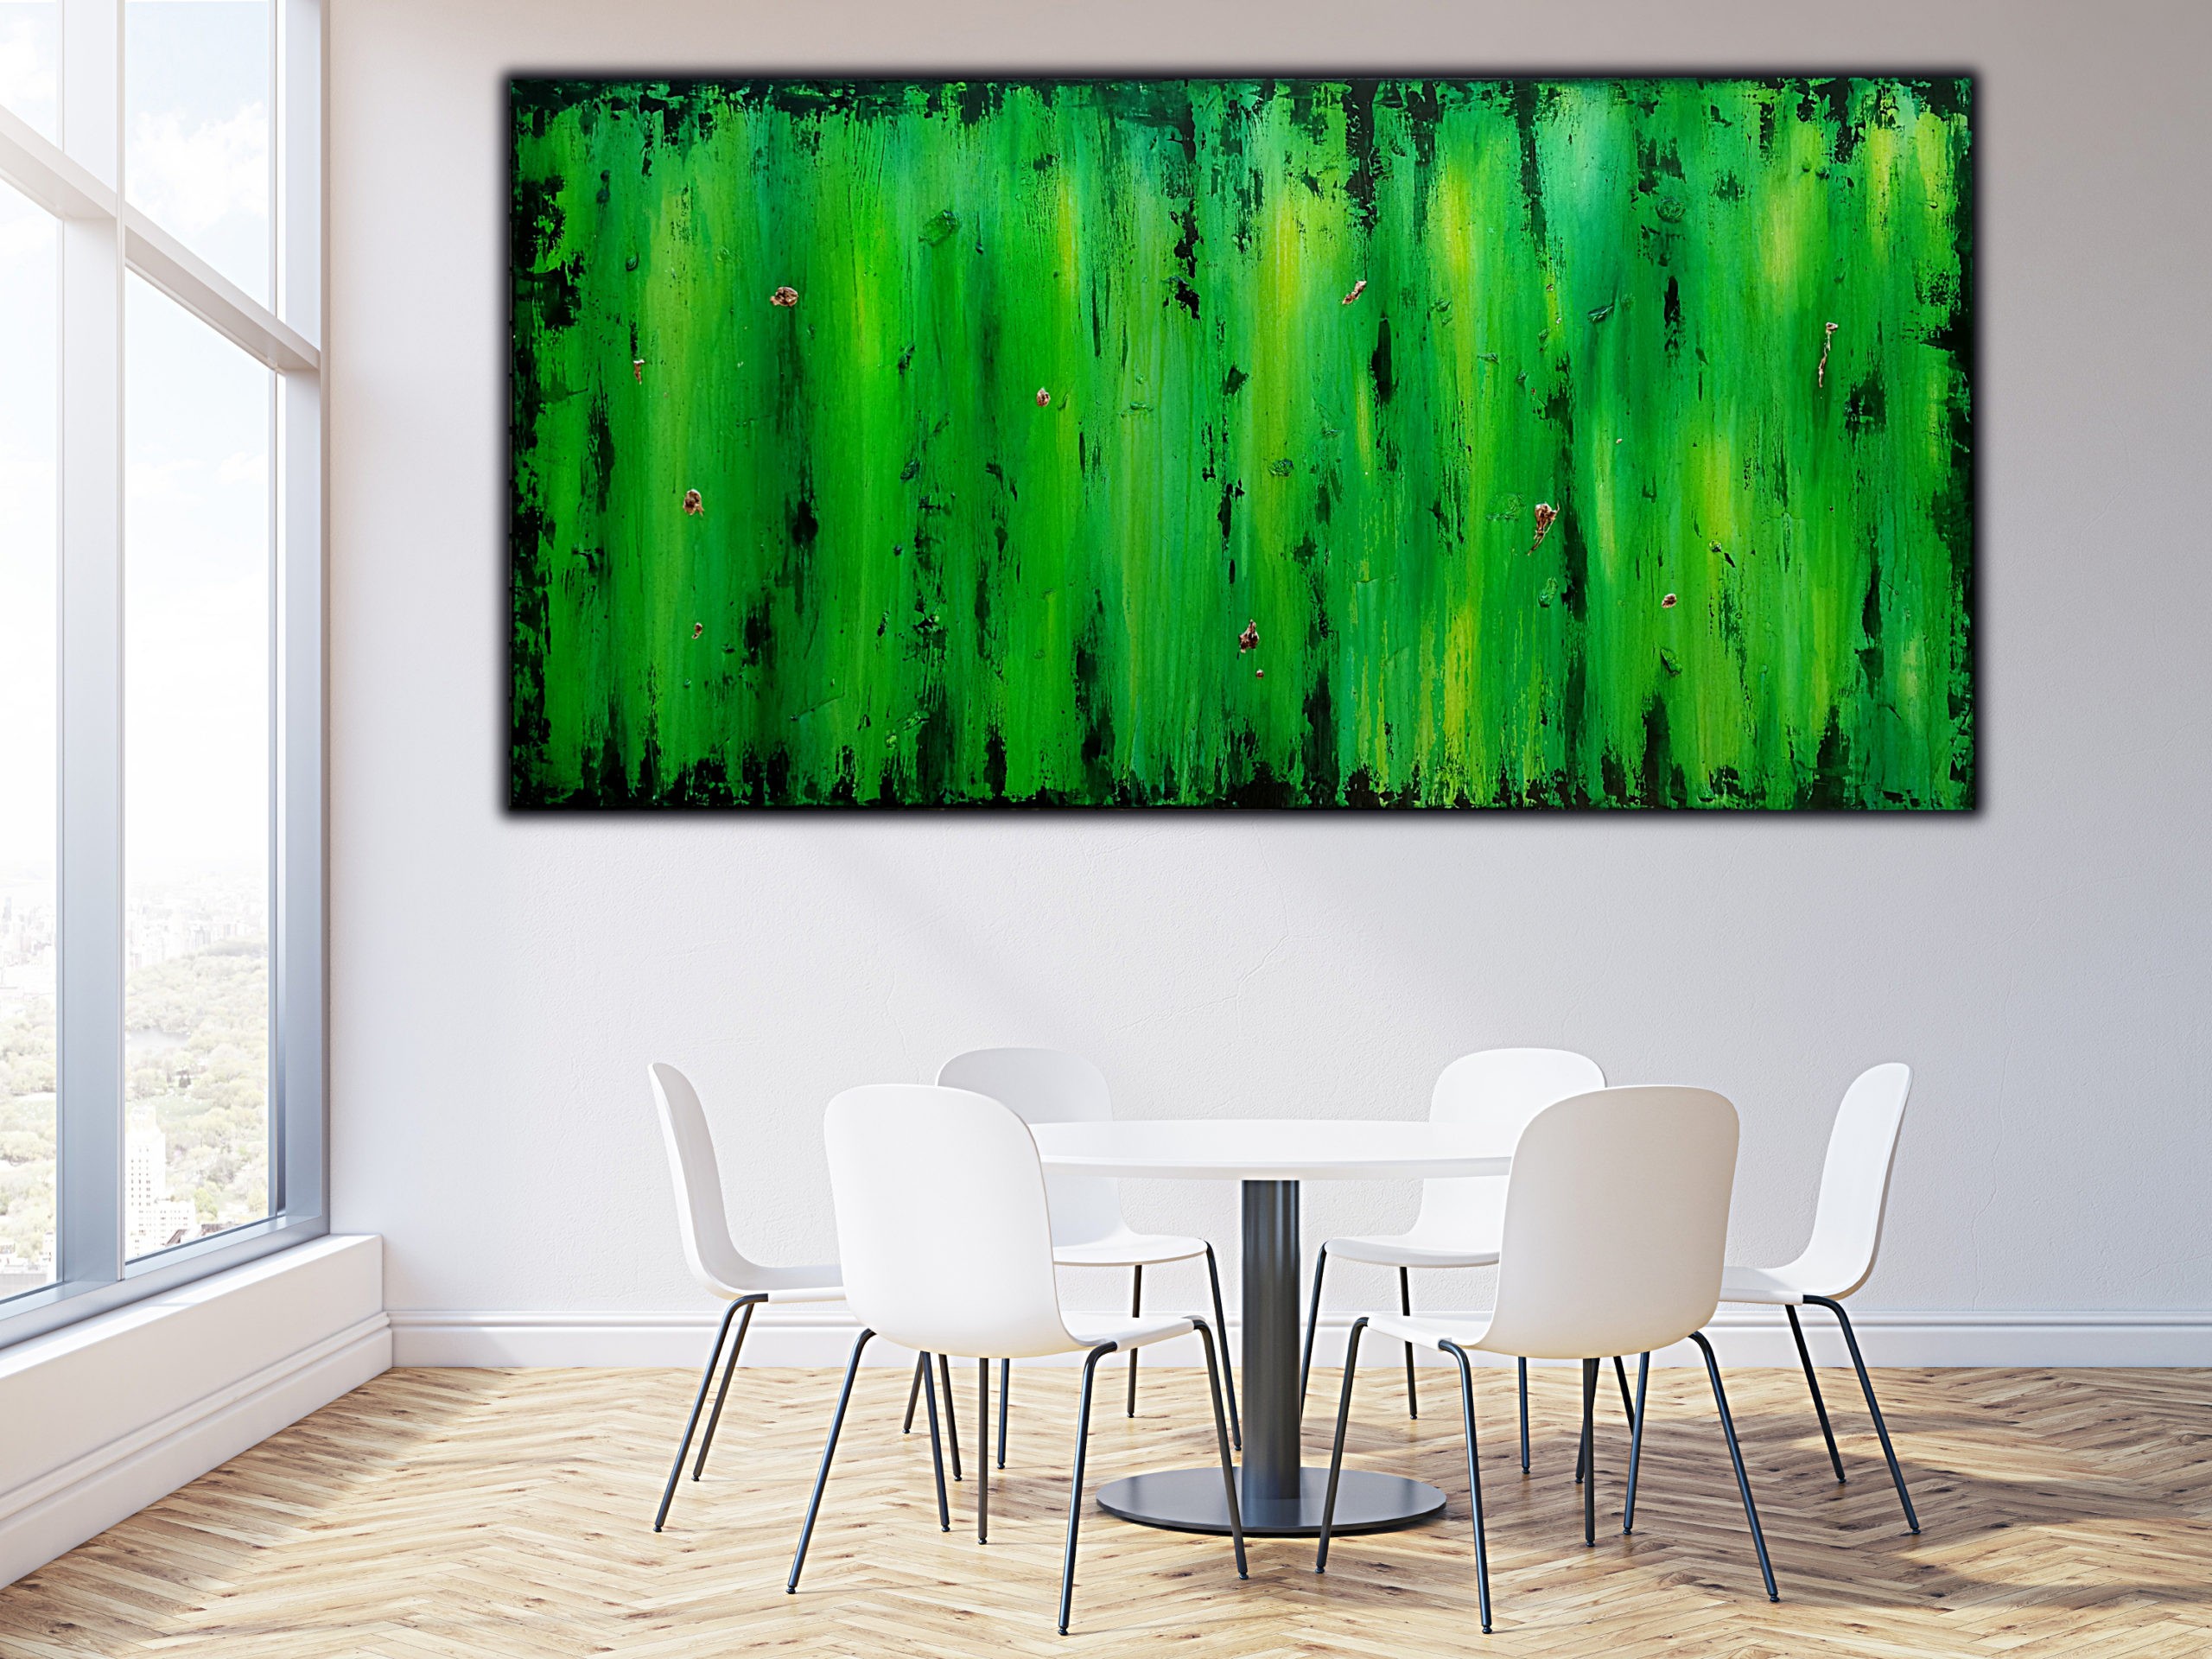 Large Green Abstract in Room